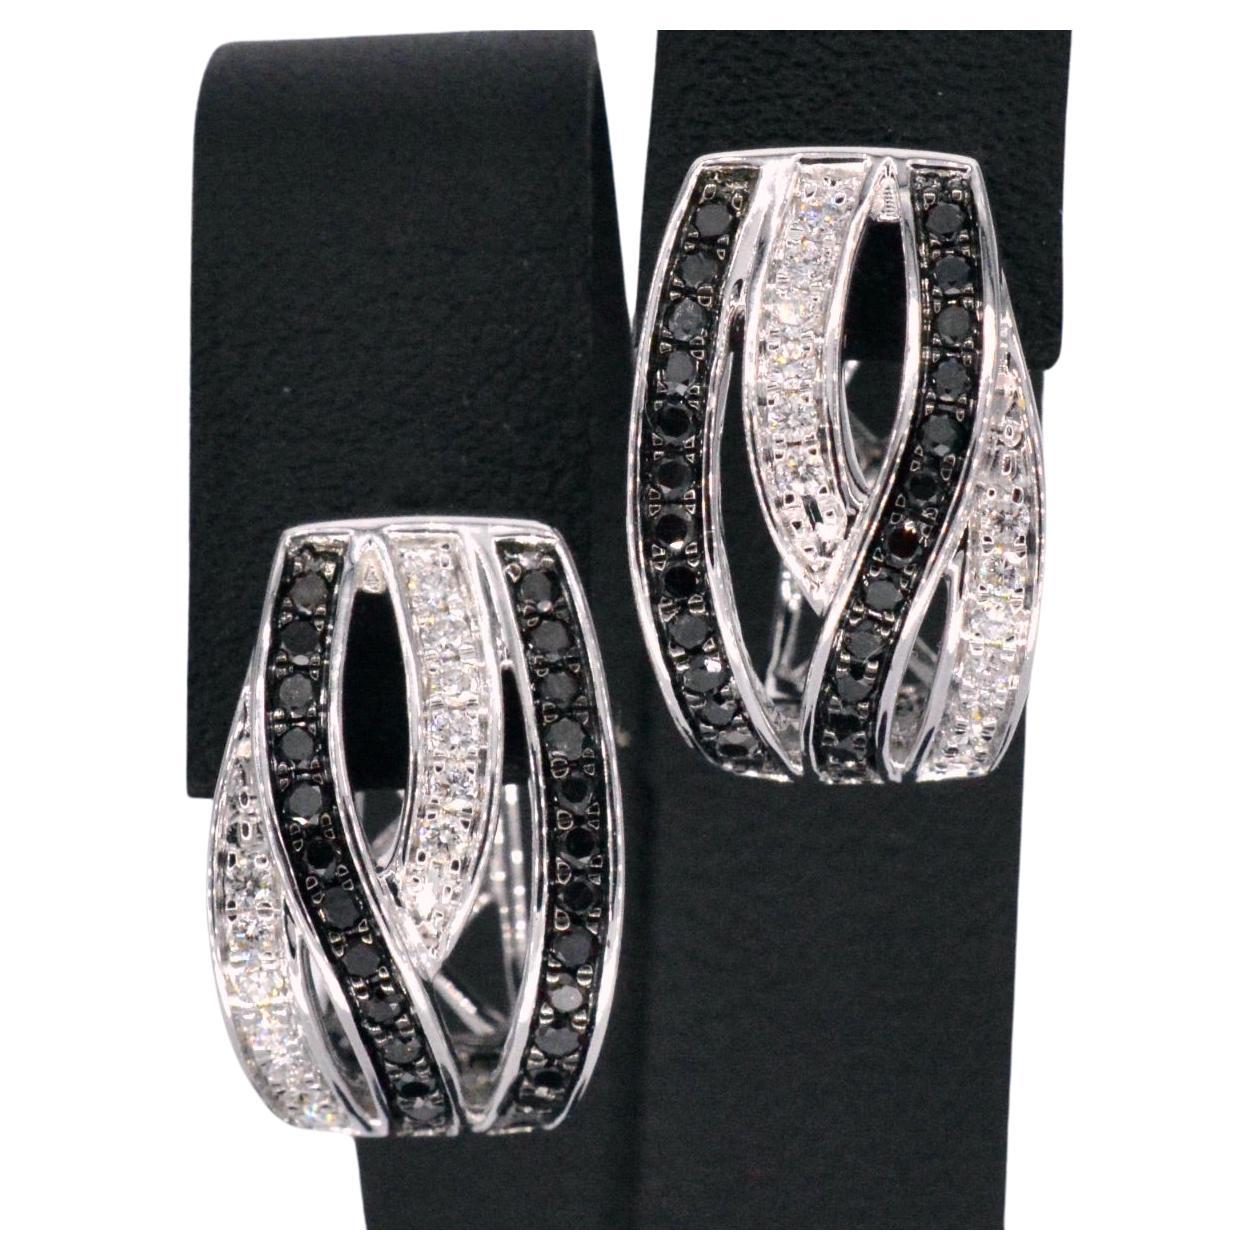 White Gold Design Earrings with White and Black Brilliant Diamonds